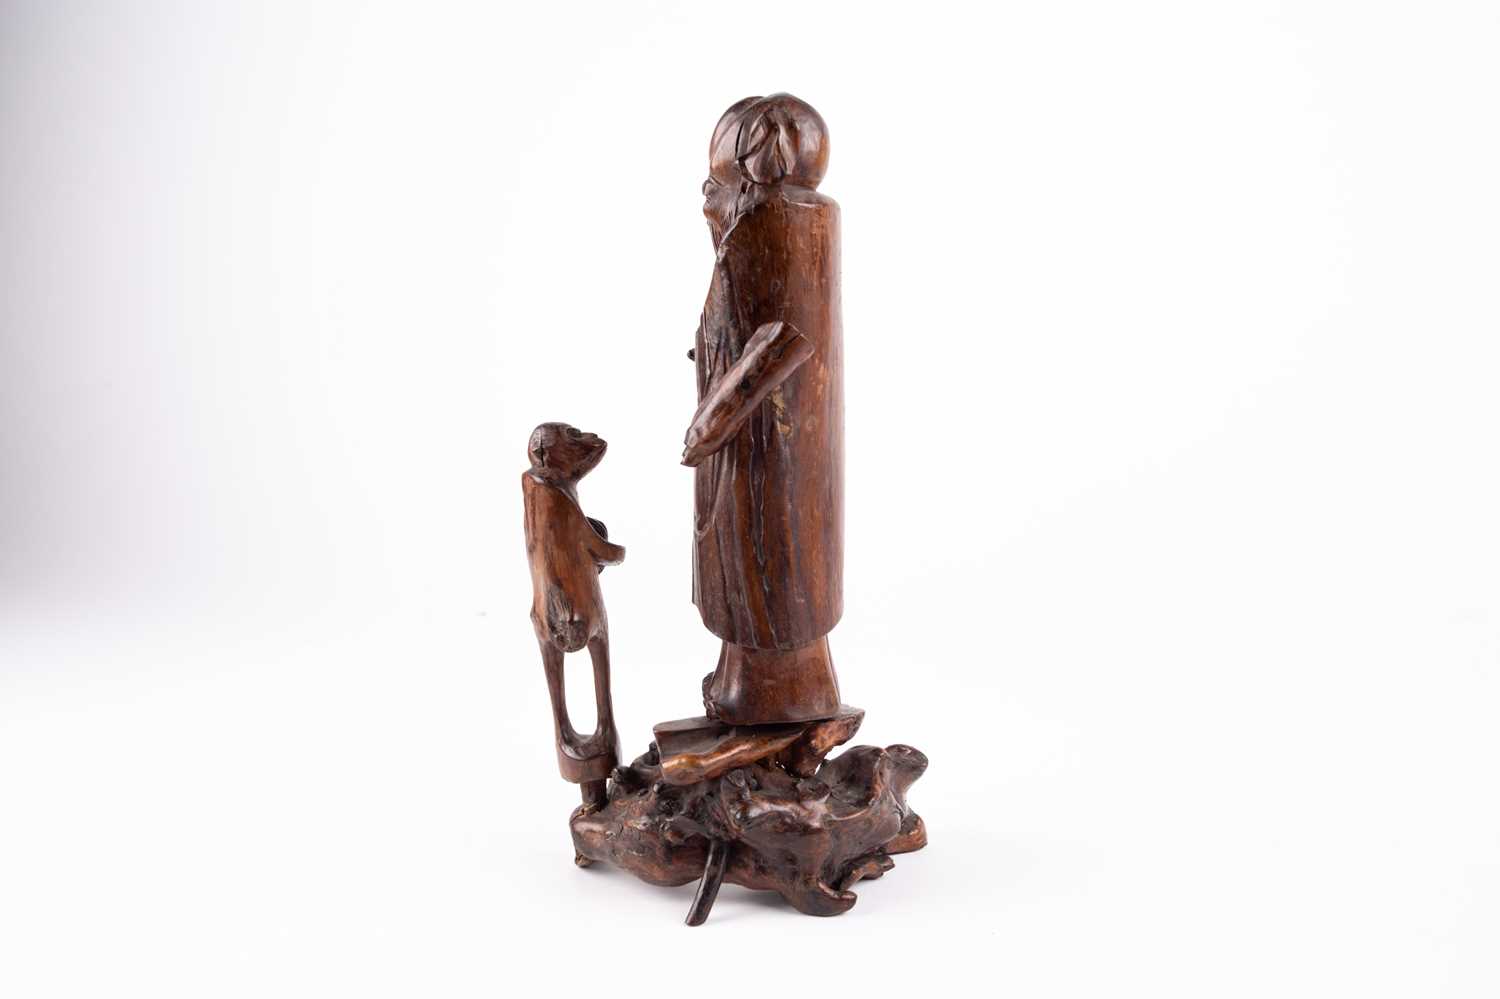 A Chinese carved wood figure of Shoulao and a Monkey, Qing, 中国, 寿老与猴木雕像一件，清代，18世纪 18th century, - Image 3 of 4